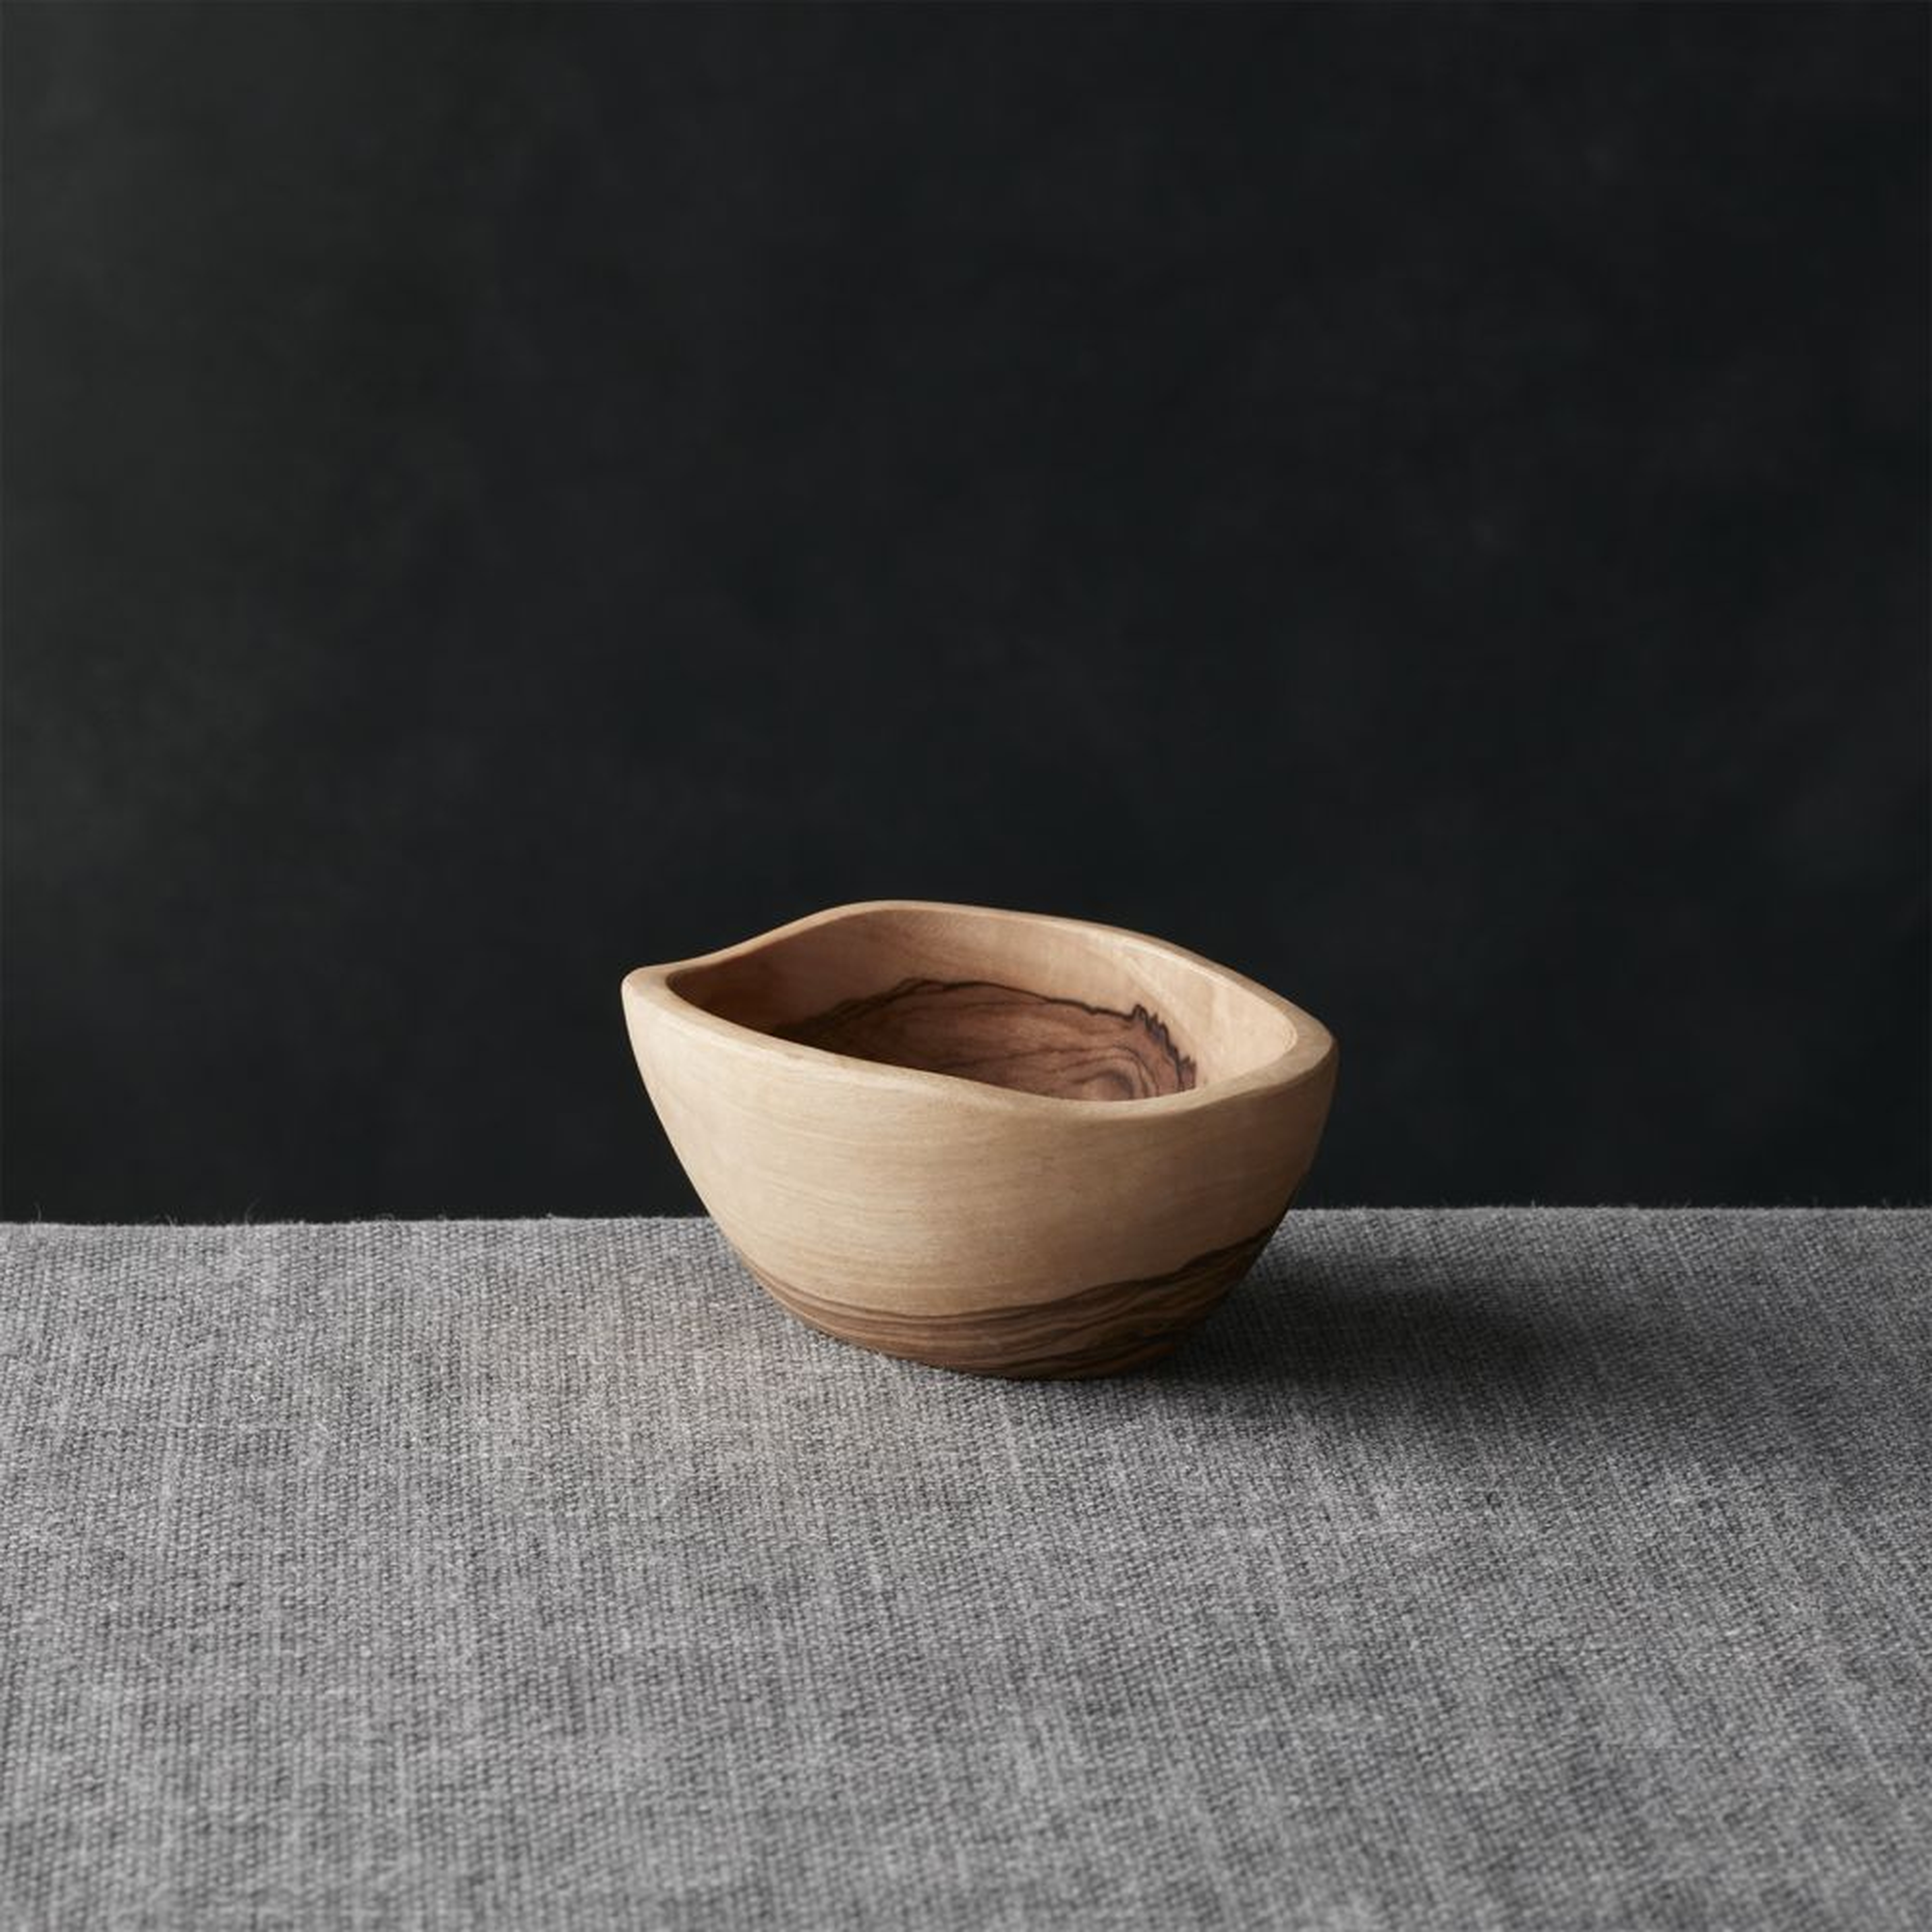 Olivewood 4.72"x3.5" Nibble Bowl - Crate and Barrel